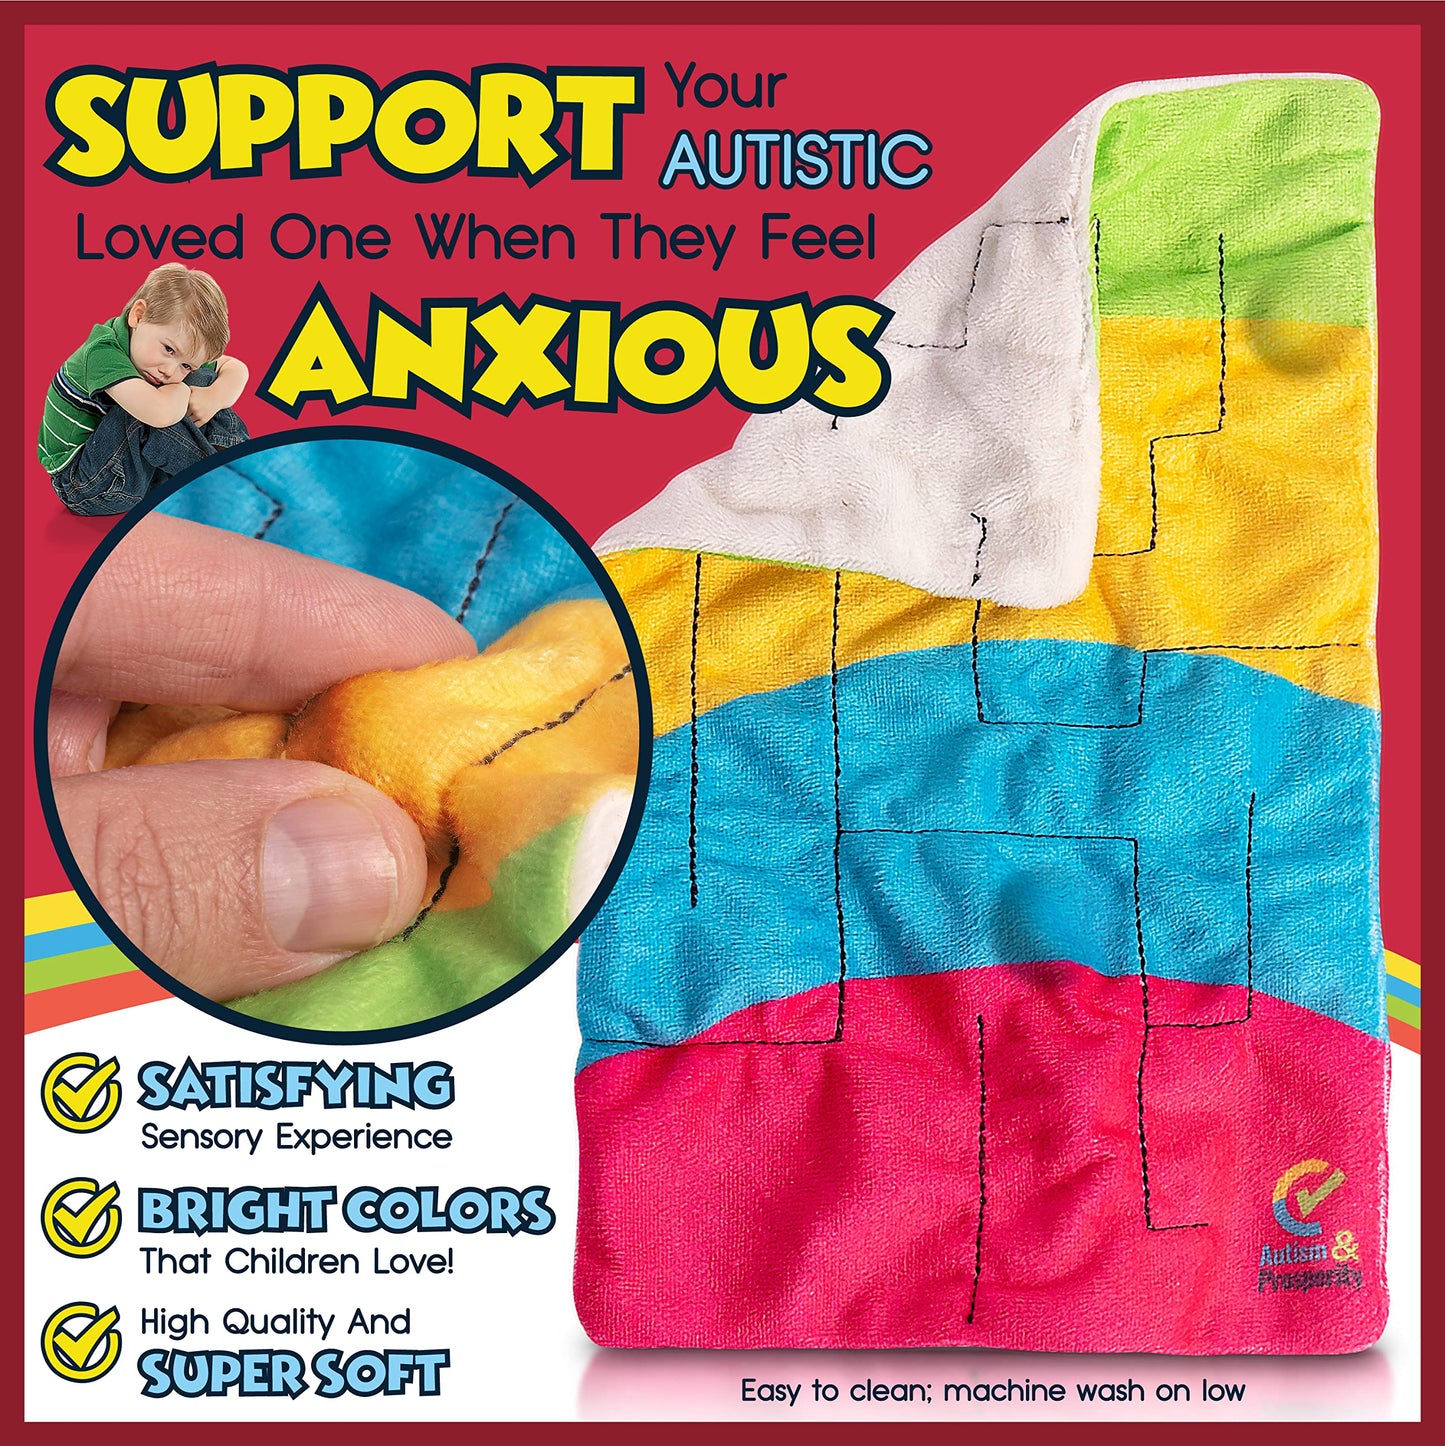 Autism & Prosperity Kids Toys Quiet & Education Sensory Stim Alt Autistic Children Bundle, ASD Boys Girl Teen Special Needs Classroom No 1-3 Toddlers Age 3 4 5-7 8-12 Products Games Learning Materials